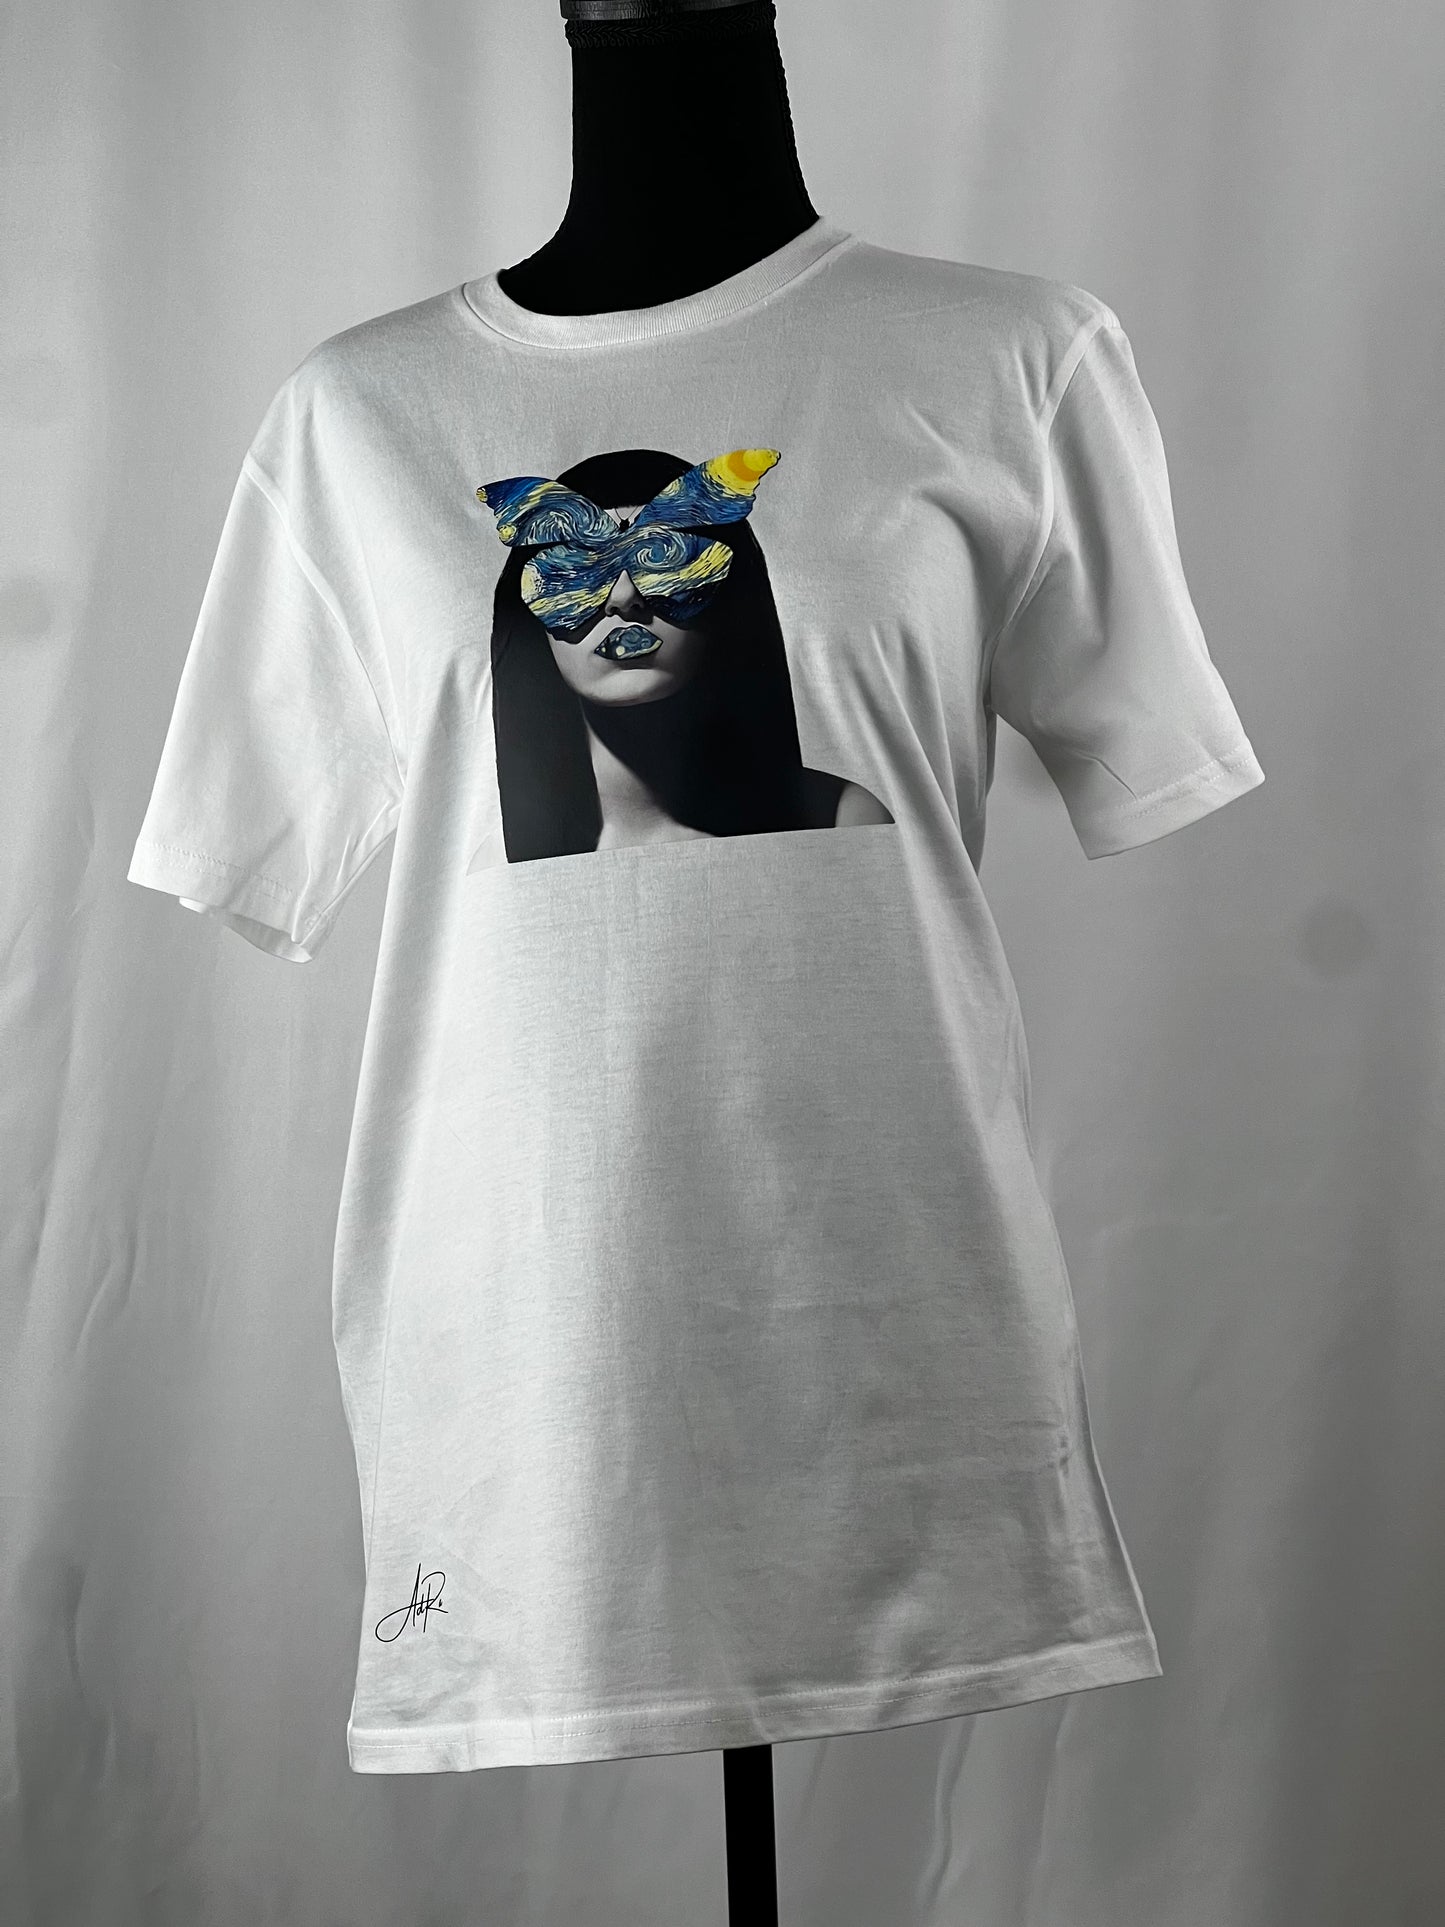 Embrace Elegance with Our Black and White Butterfly Eyes Graphic T-Shirt | Adra Apparel